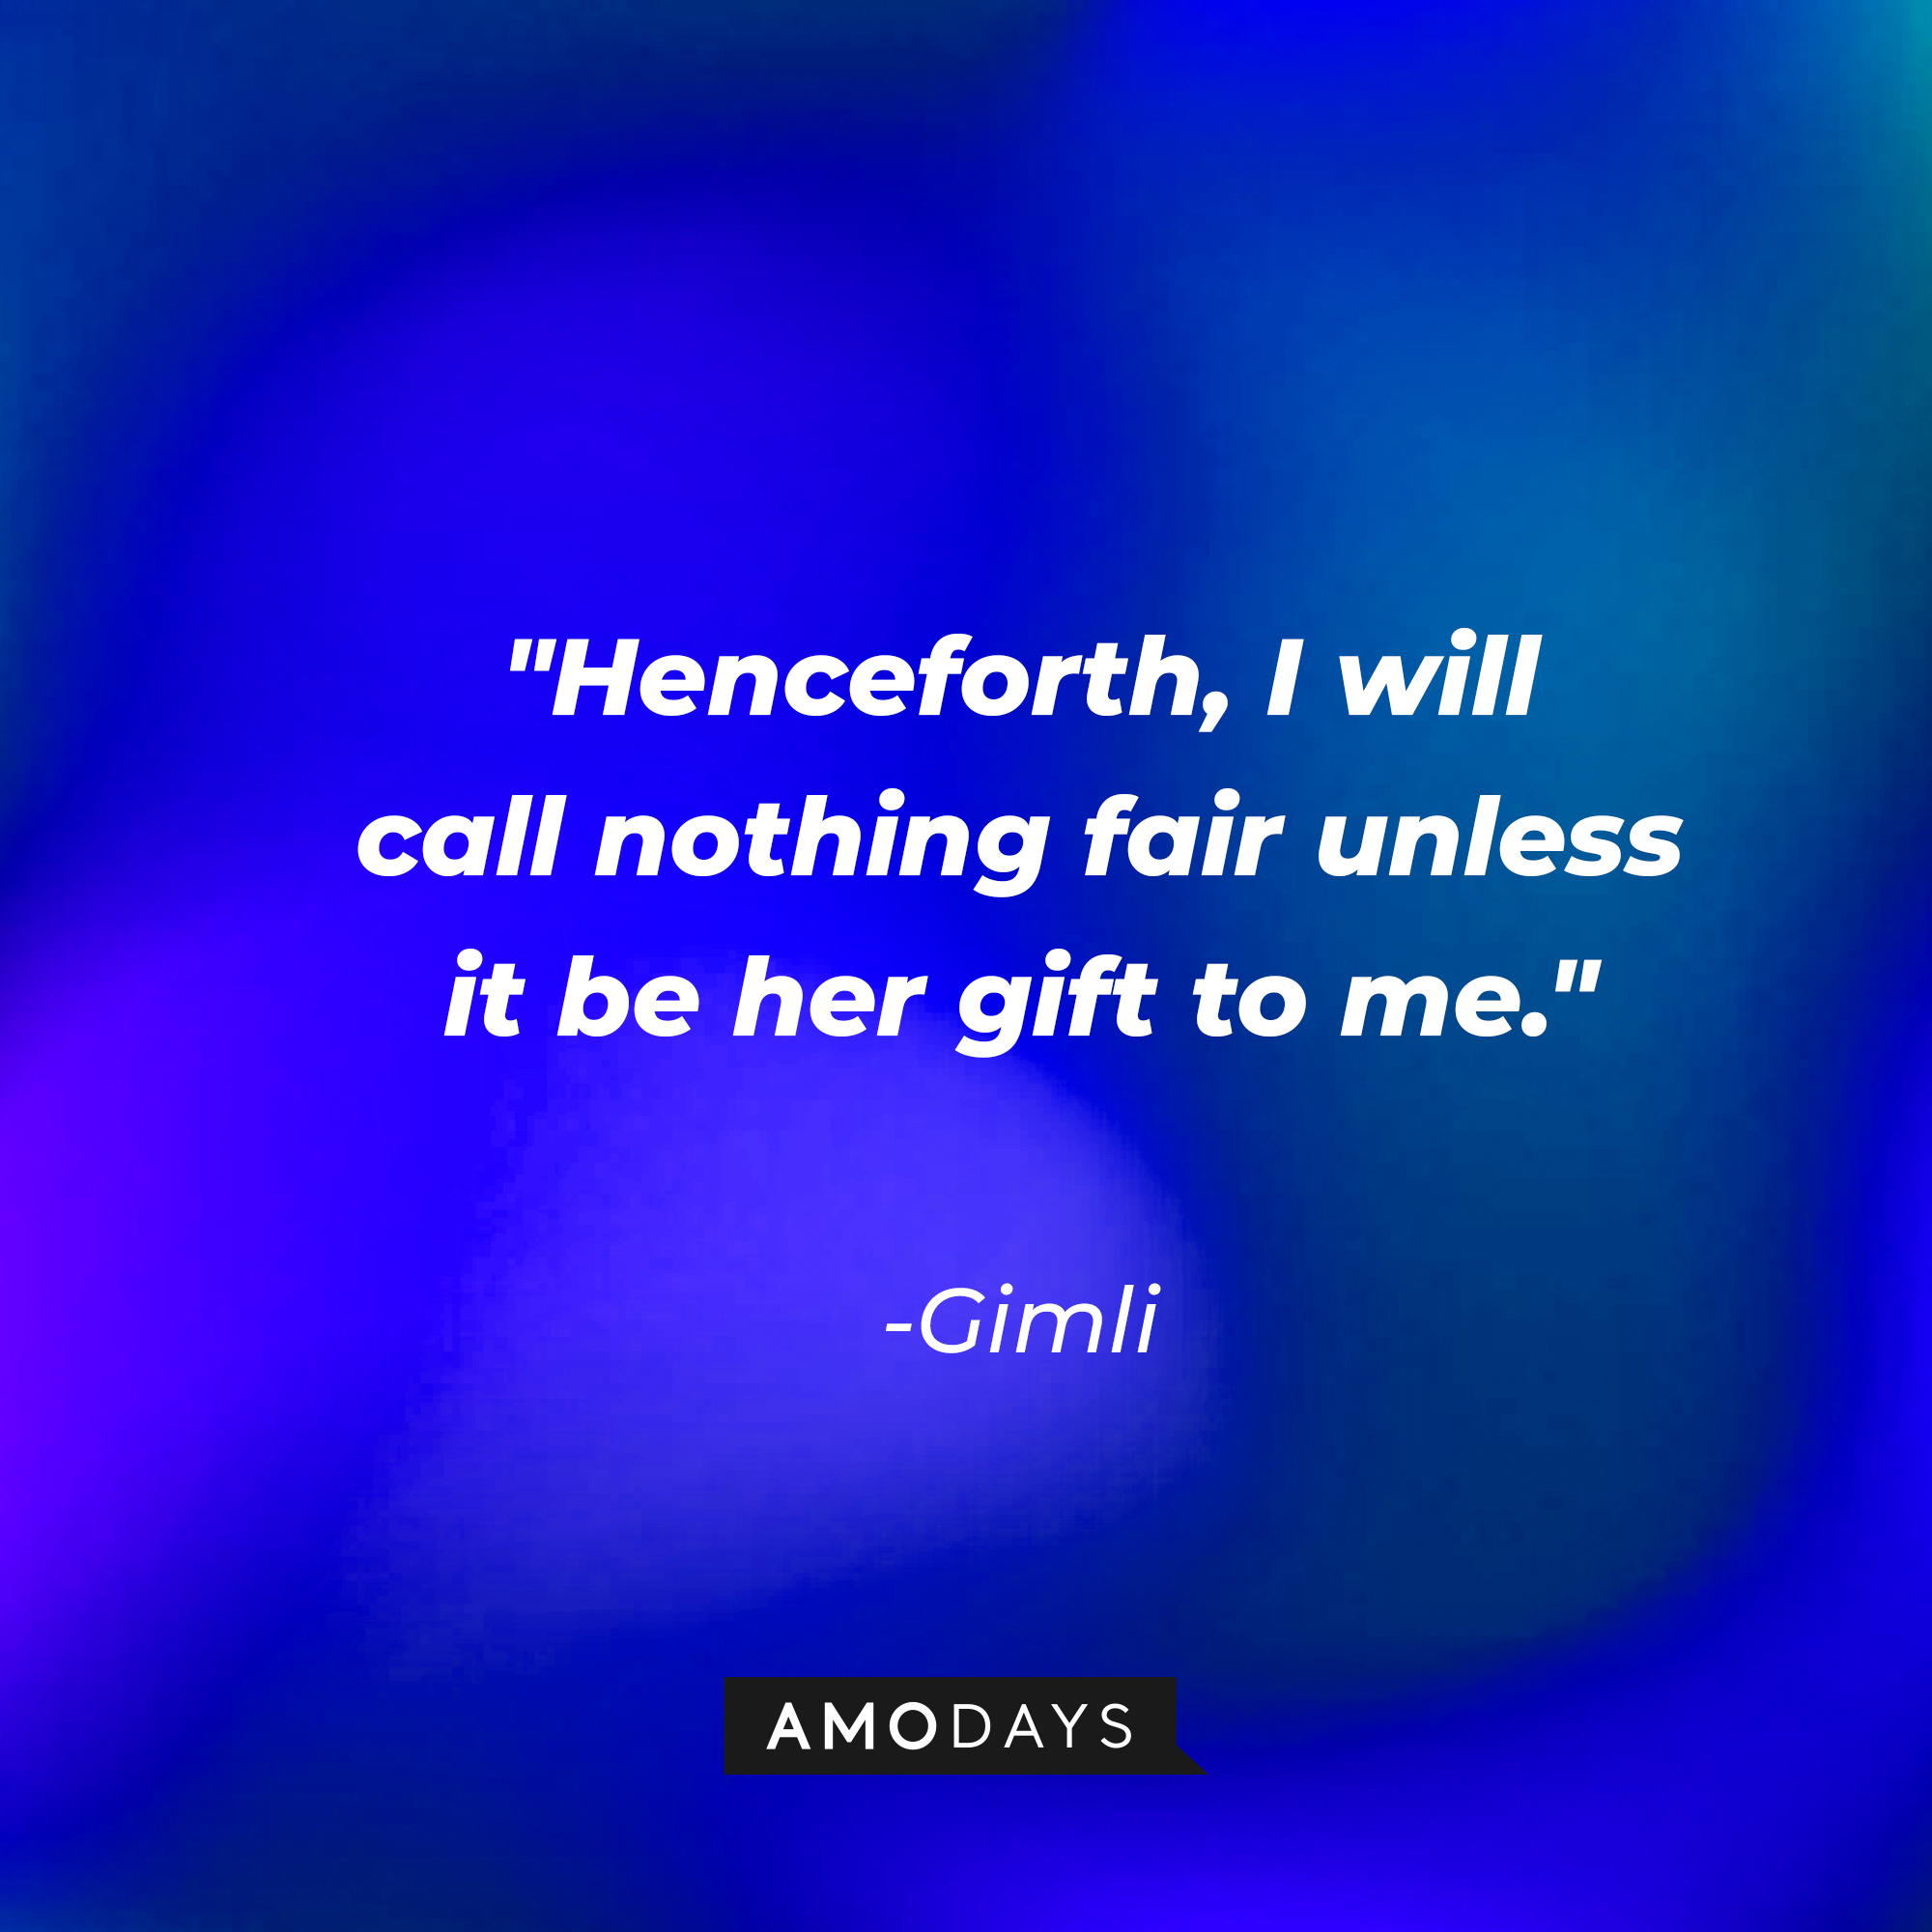 Gimli's quote: "Henceforth, I will call nothing fair unless it be her gift to me." | Source: AmoDays